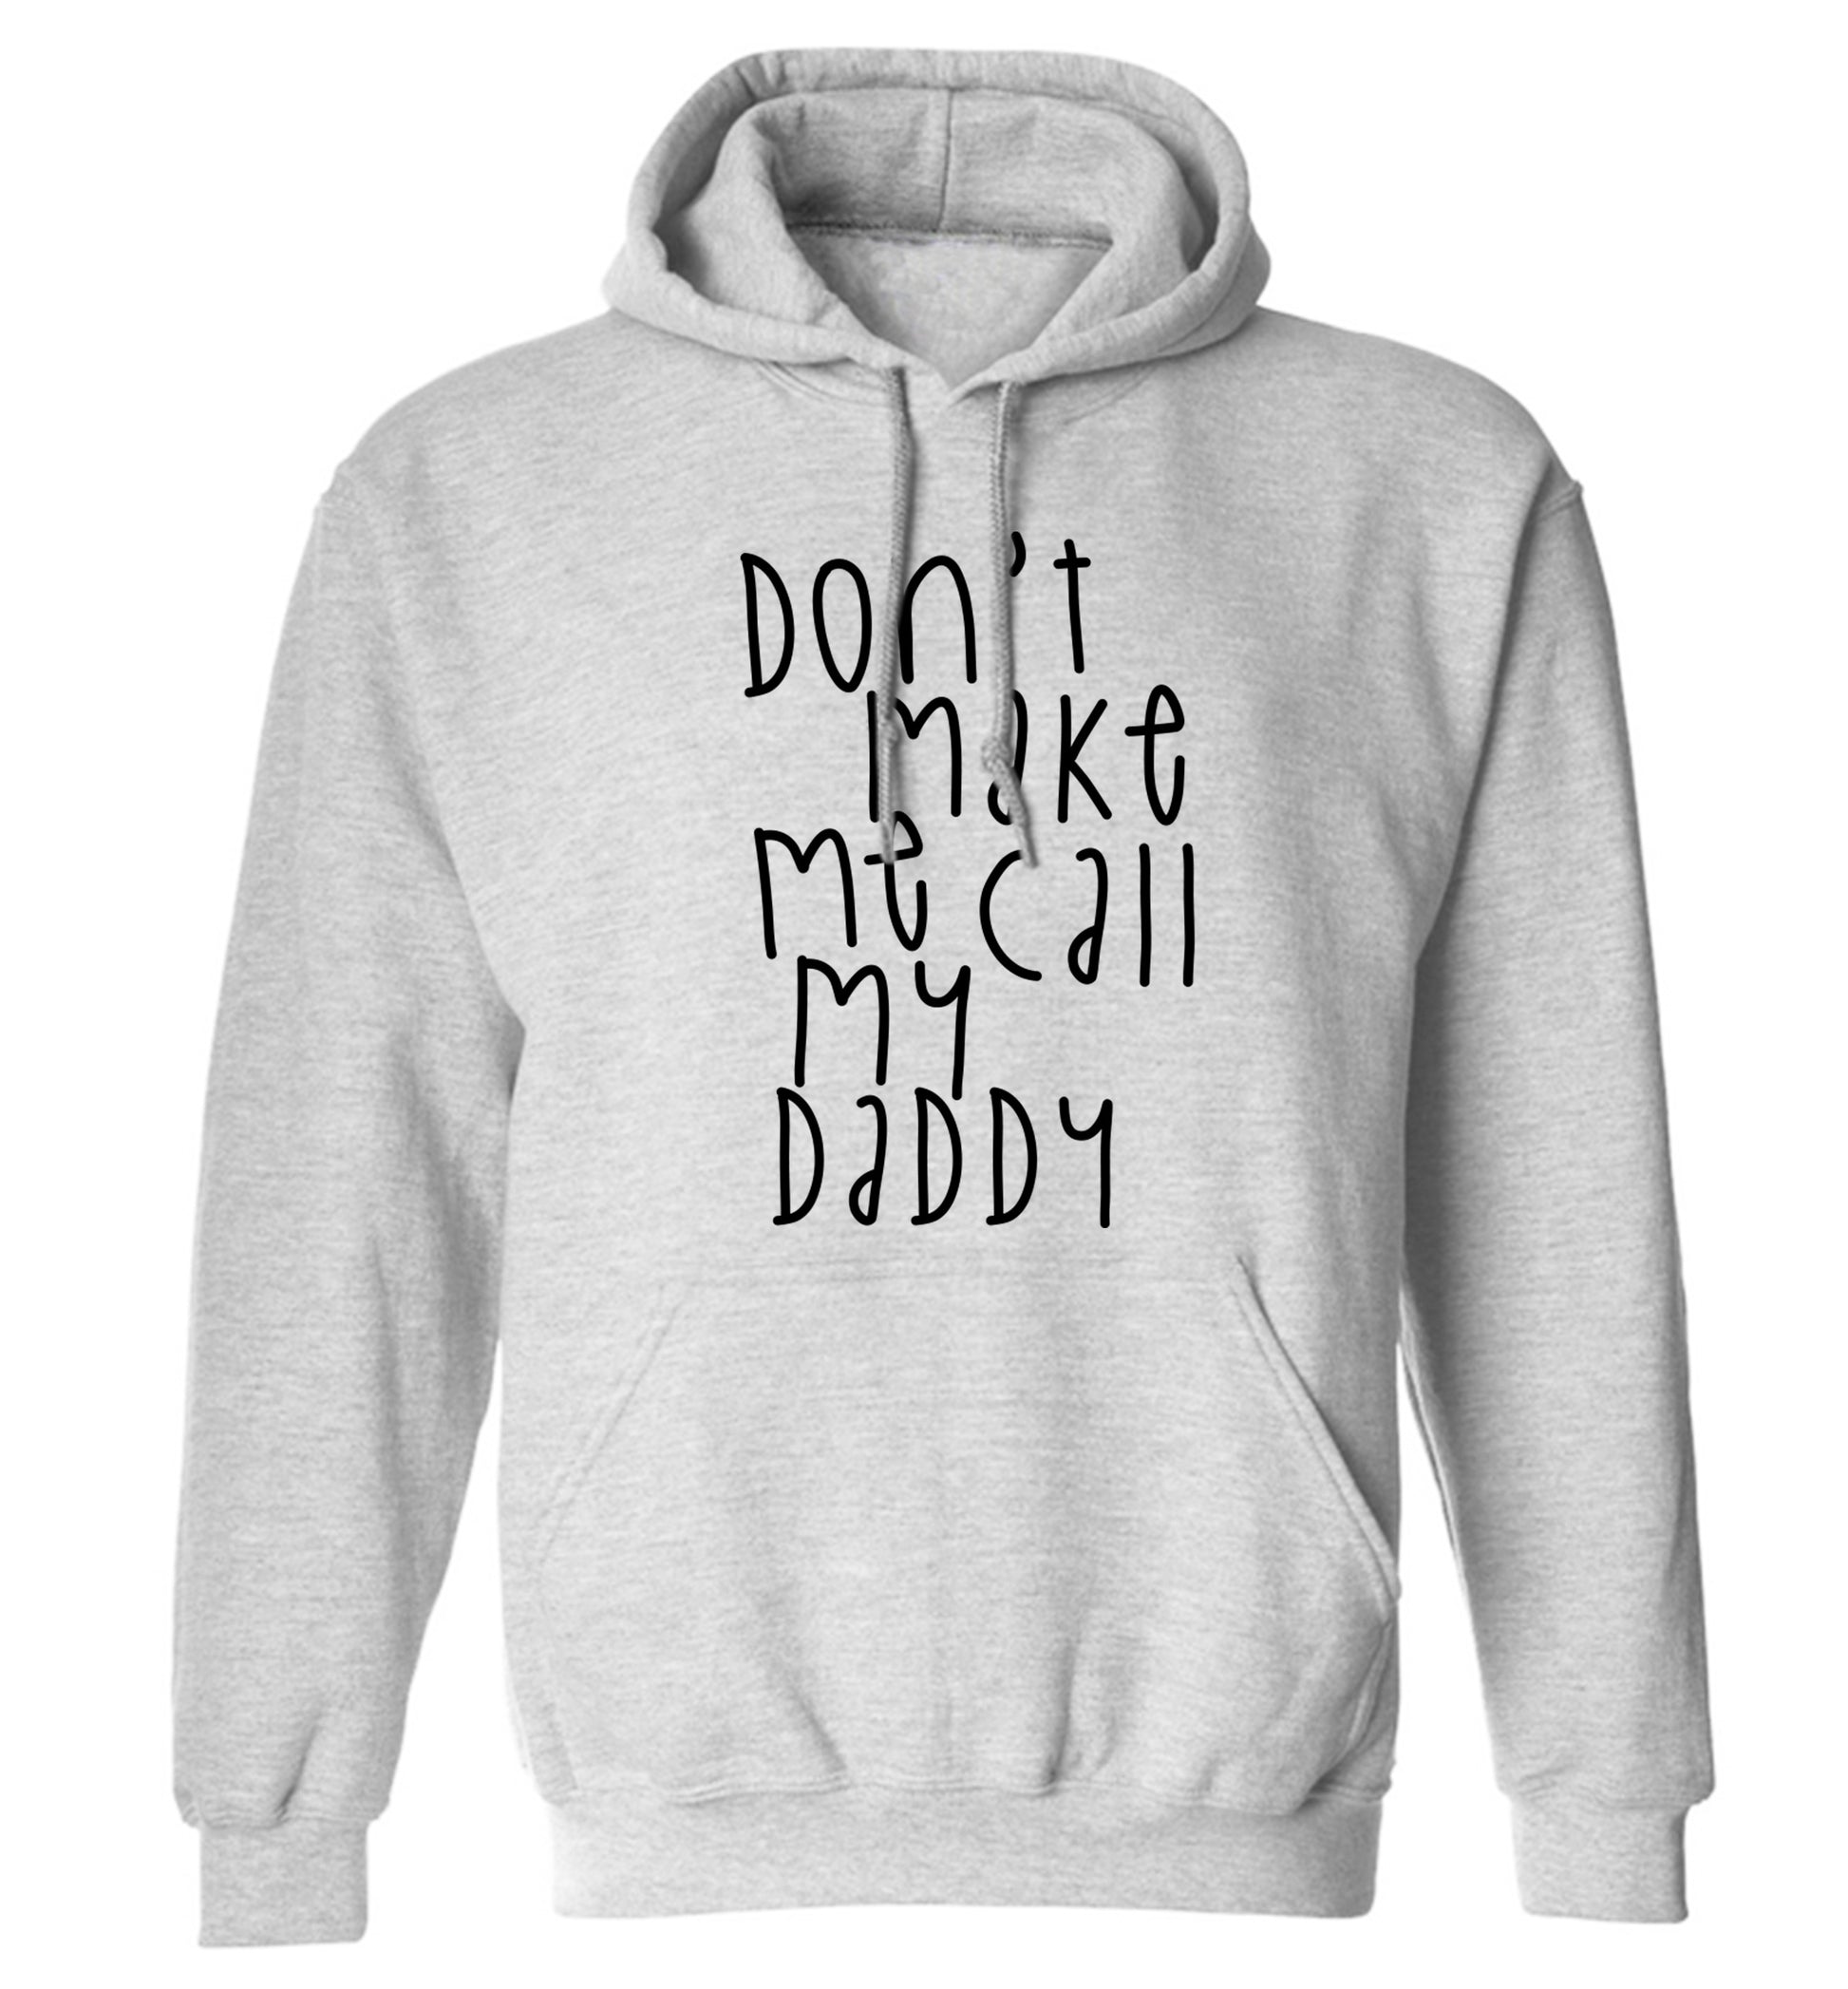 Don't make me call my daddy adults unisex grey hoodie 2XL